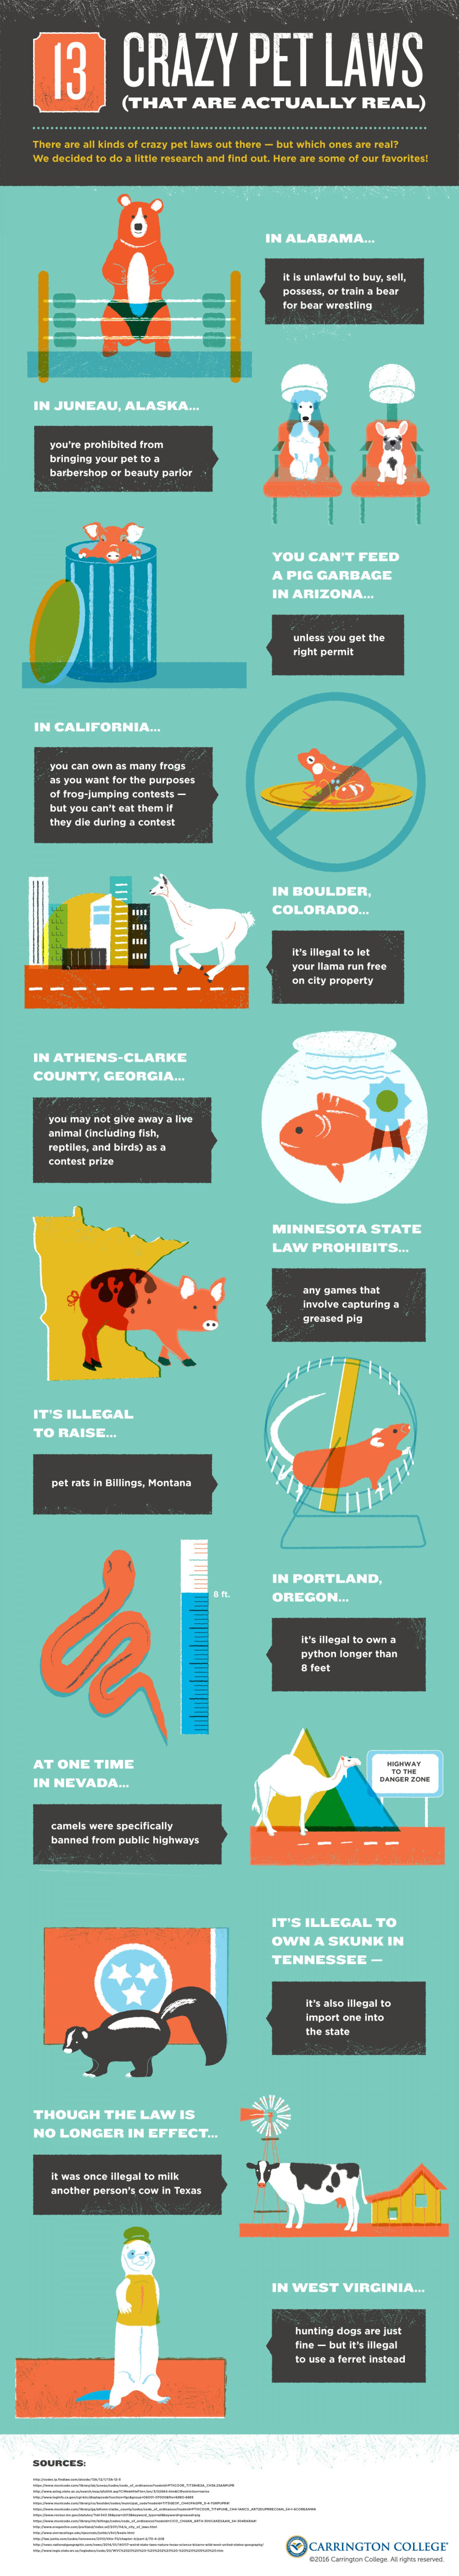 13 Crazy Pet Laws (That Are Actually Real!)  Infographic